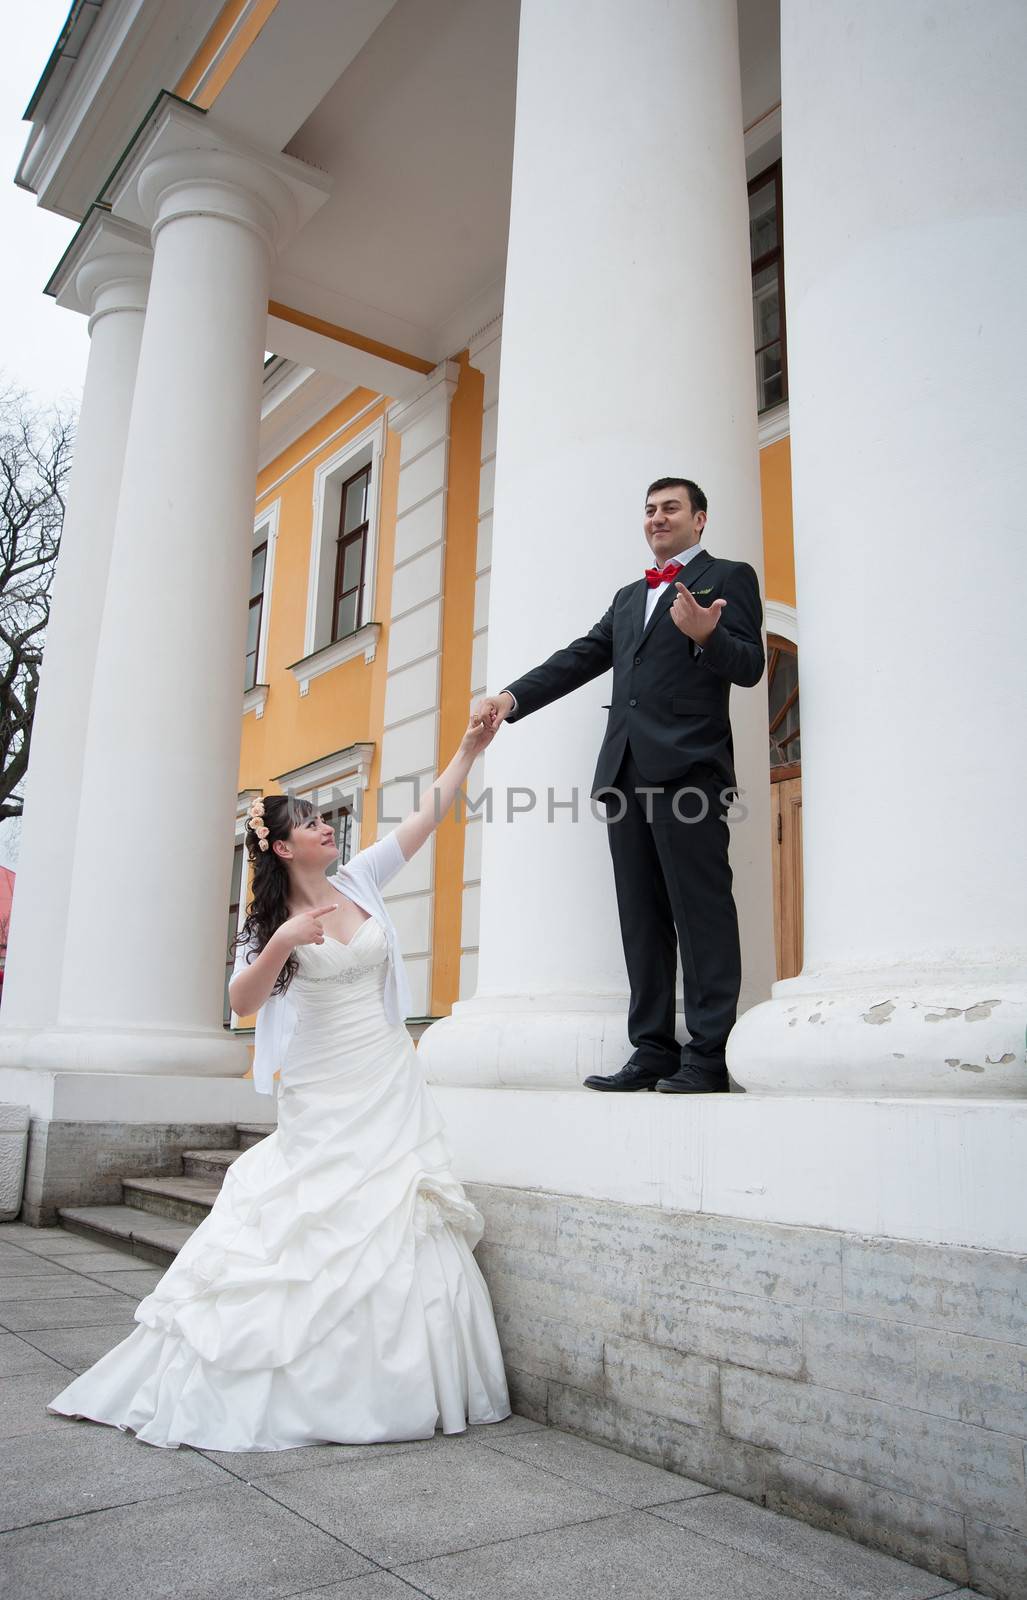 bride pulling the groom's hand